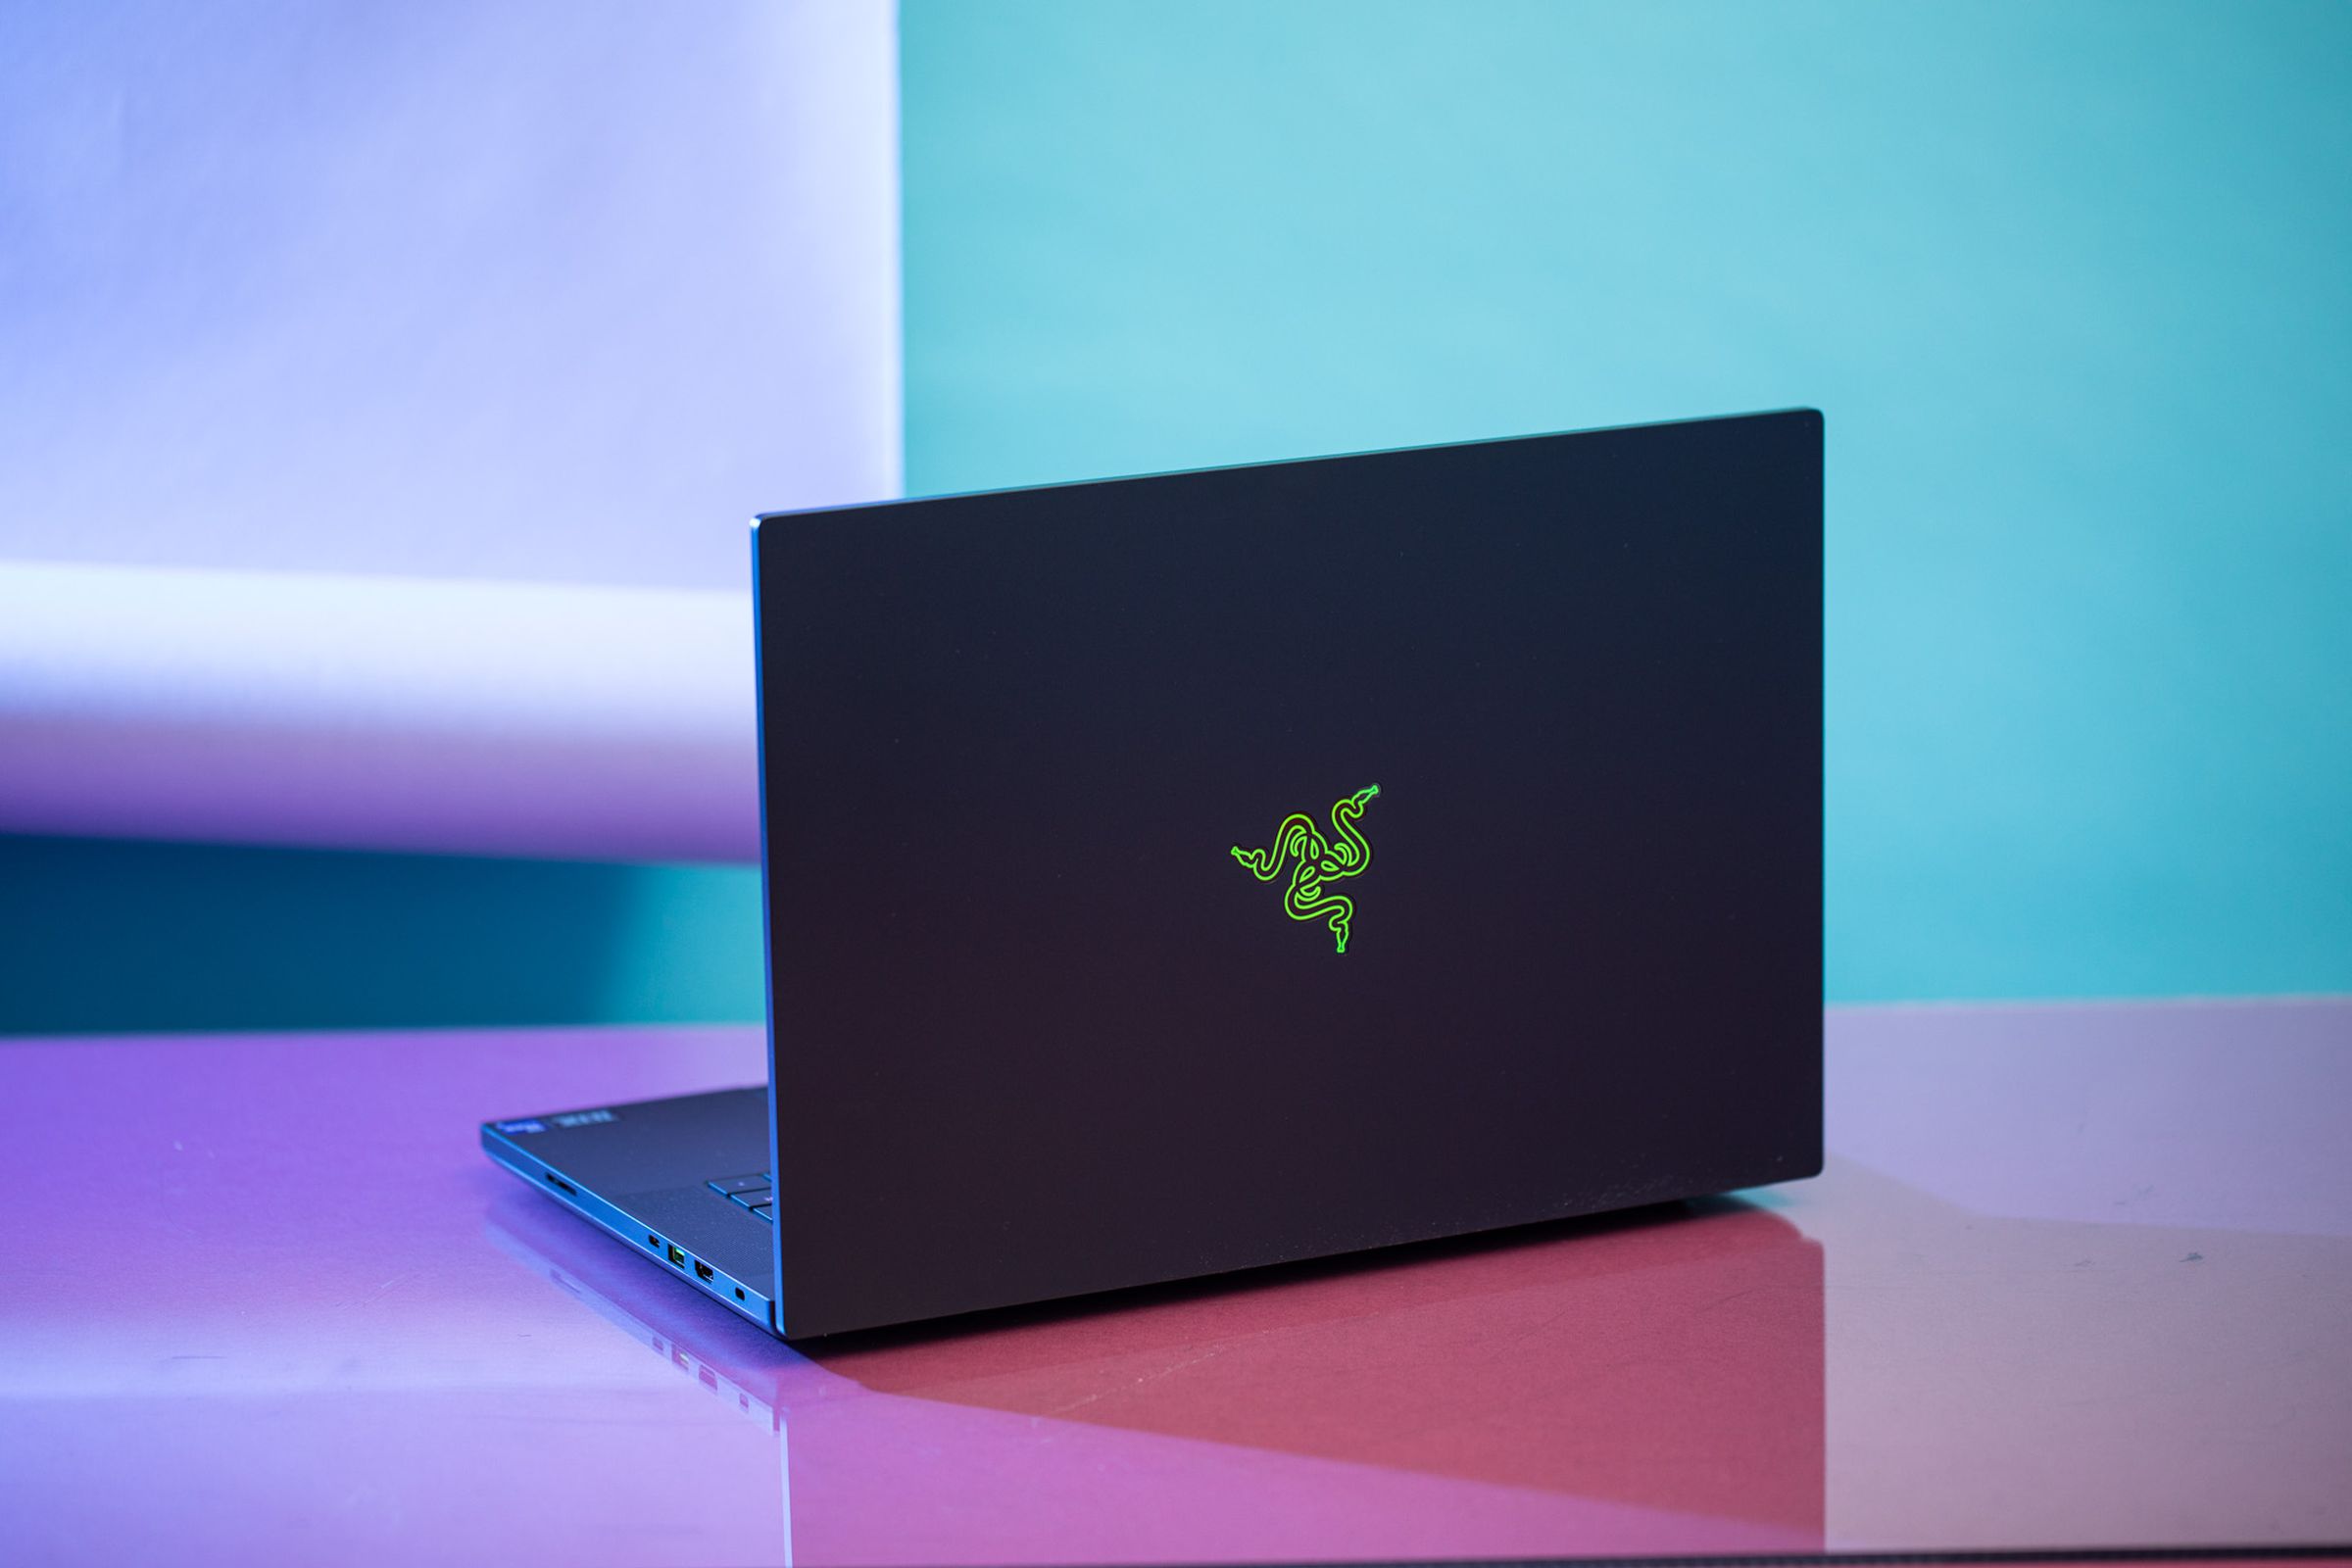 The Razer Blade 16 facing away from the camera.